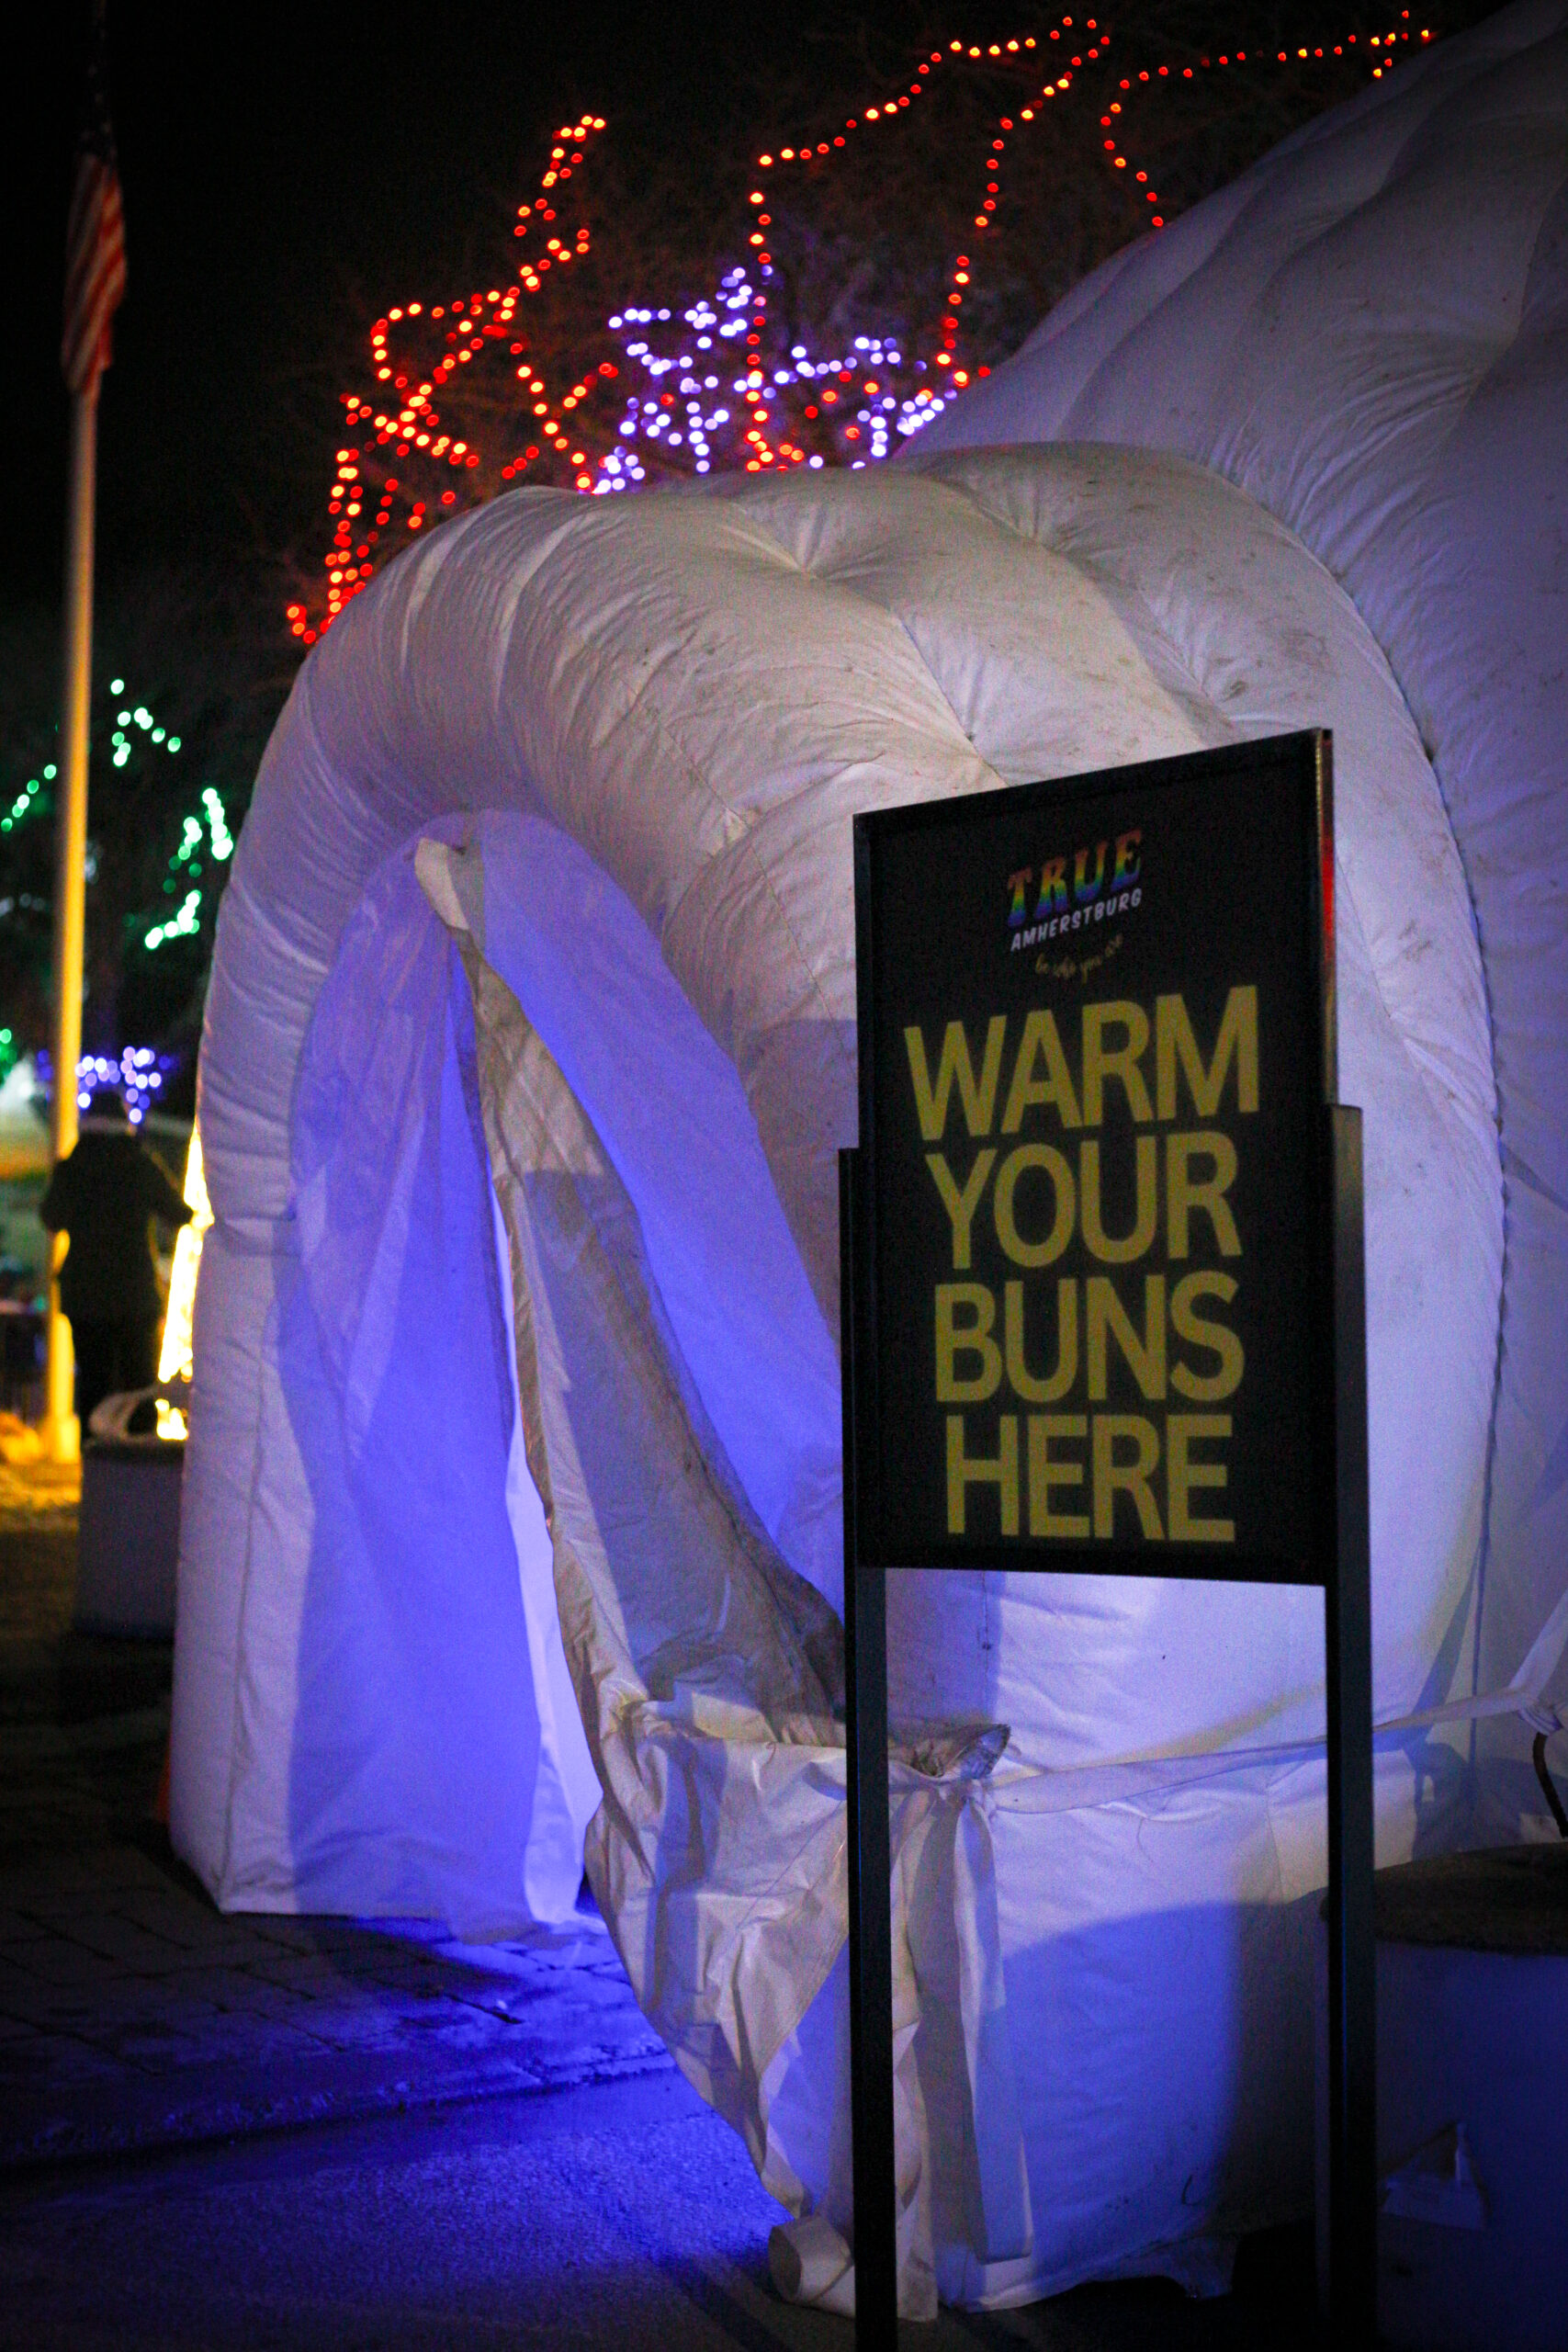 Igloo entrance with warm your buns sign